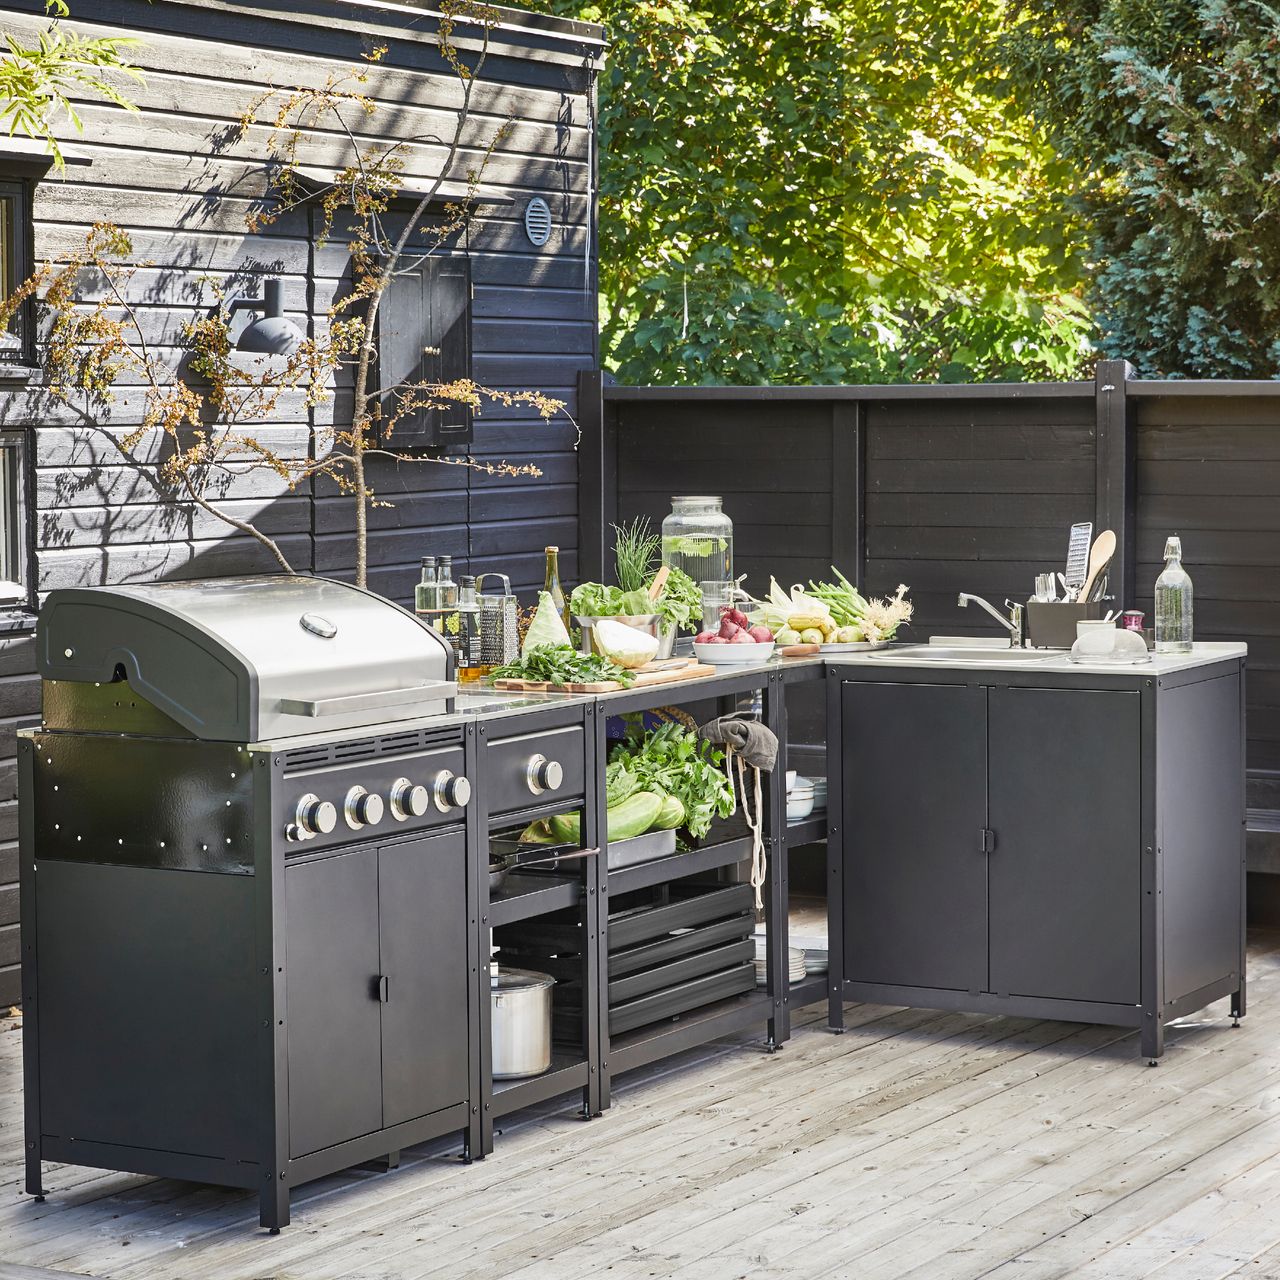 How to plan an outdoor kitchen – 10 key points to consider | Ideal Home